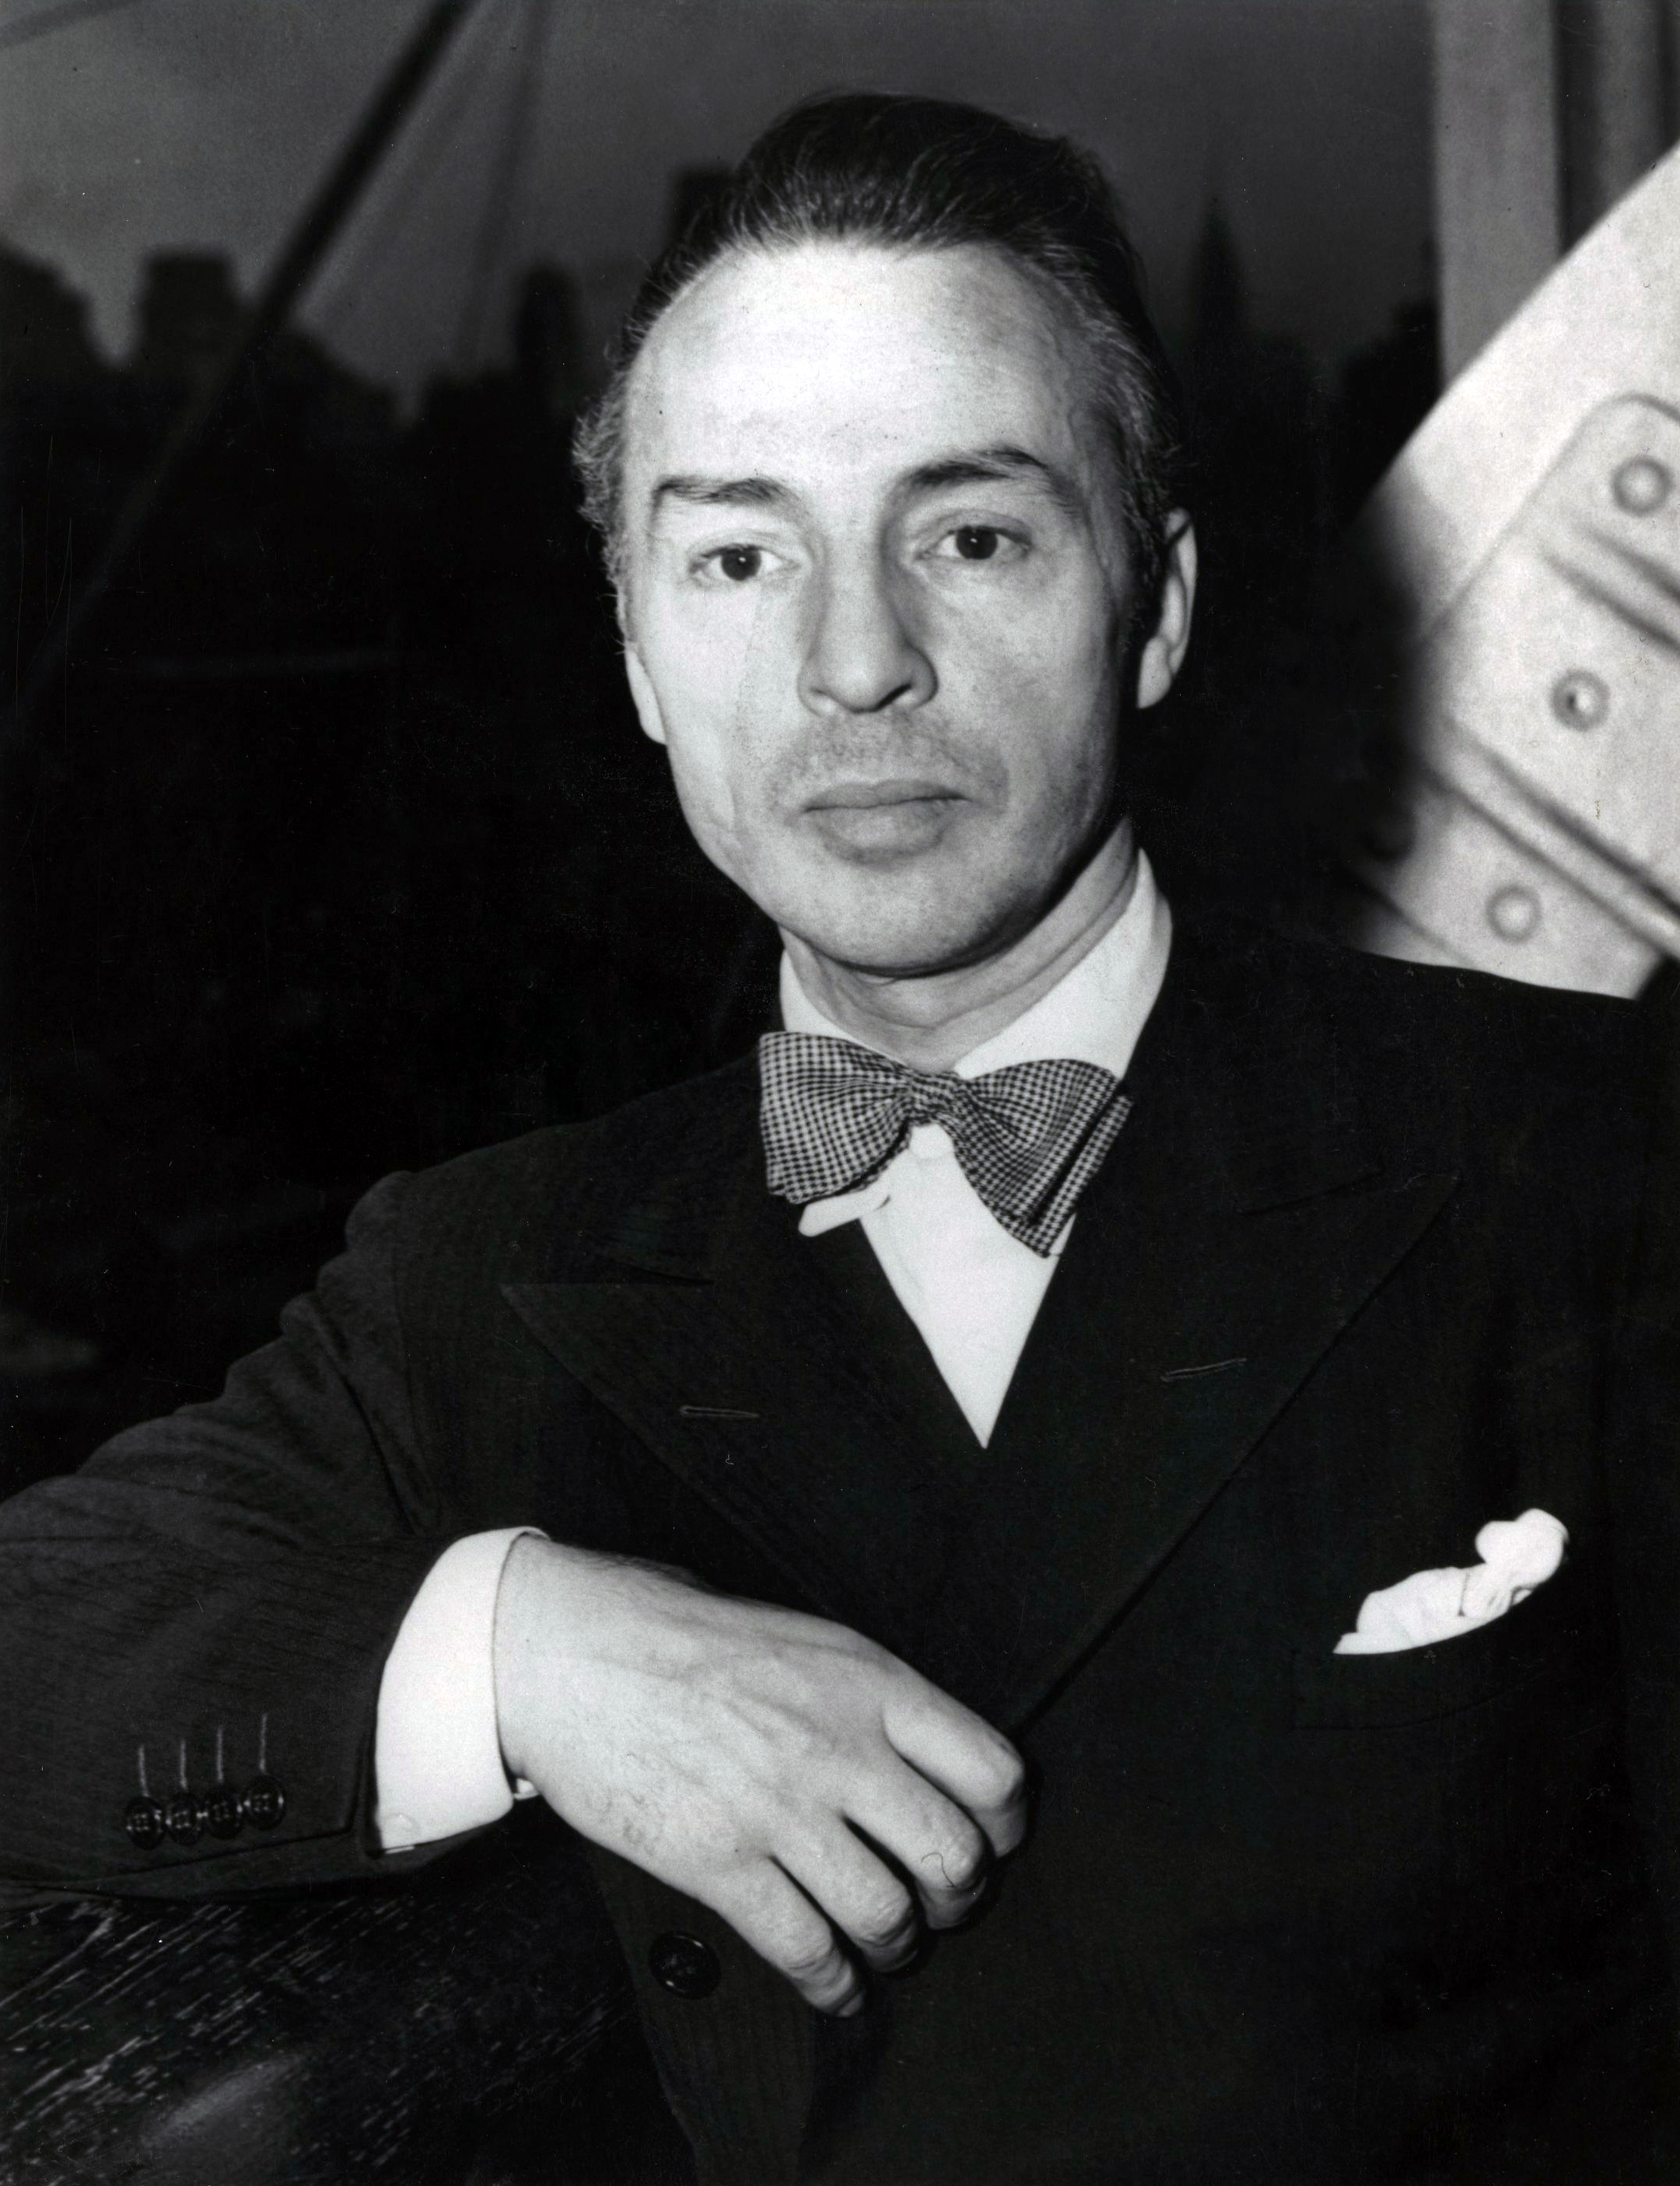 George Balanchine (1904-1983) founder of the New York City Ballet. Trained in the Imperial Ballet School of pre-revolutionary Russia, he became the greatest ballet choreographer of the 20th century. He was teacher and mentor to Suzanne Farrell and many other great dancers. (Archive Photos)